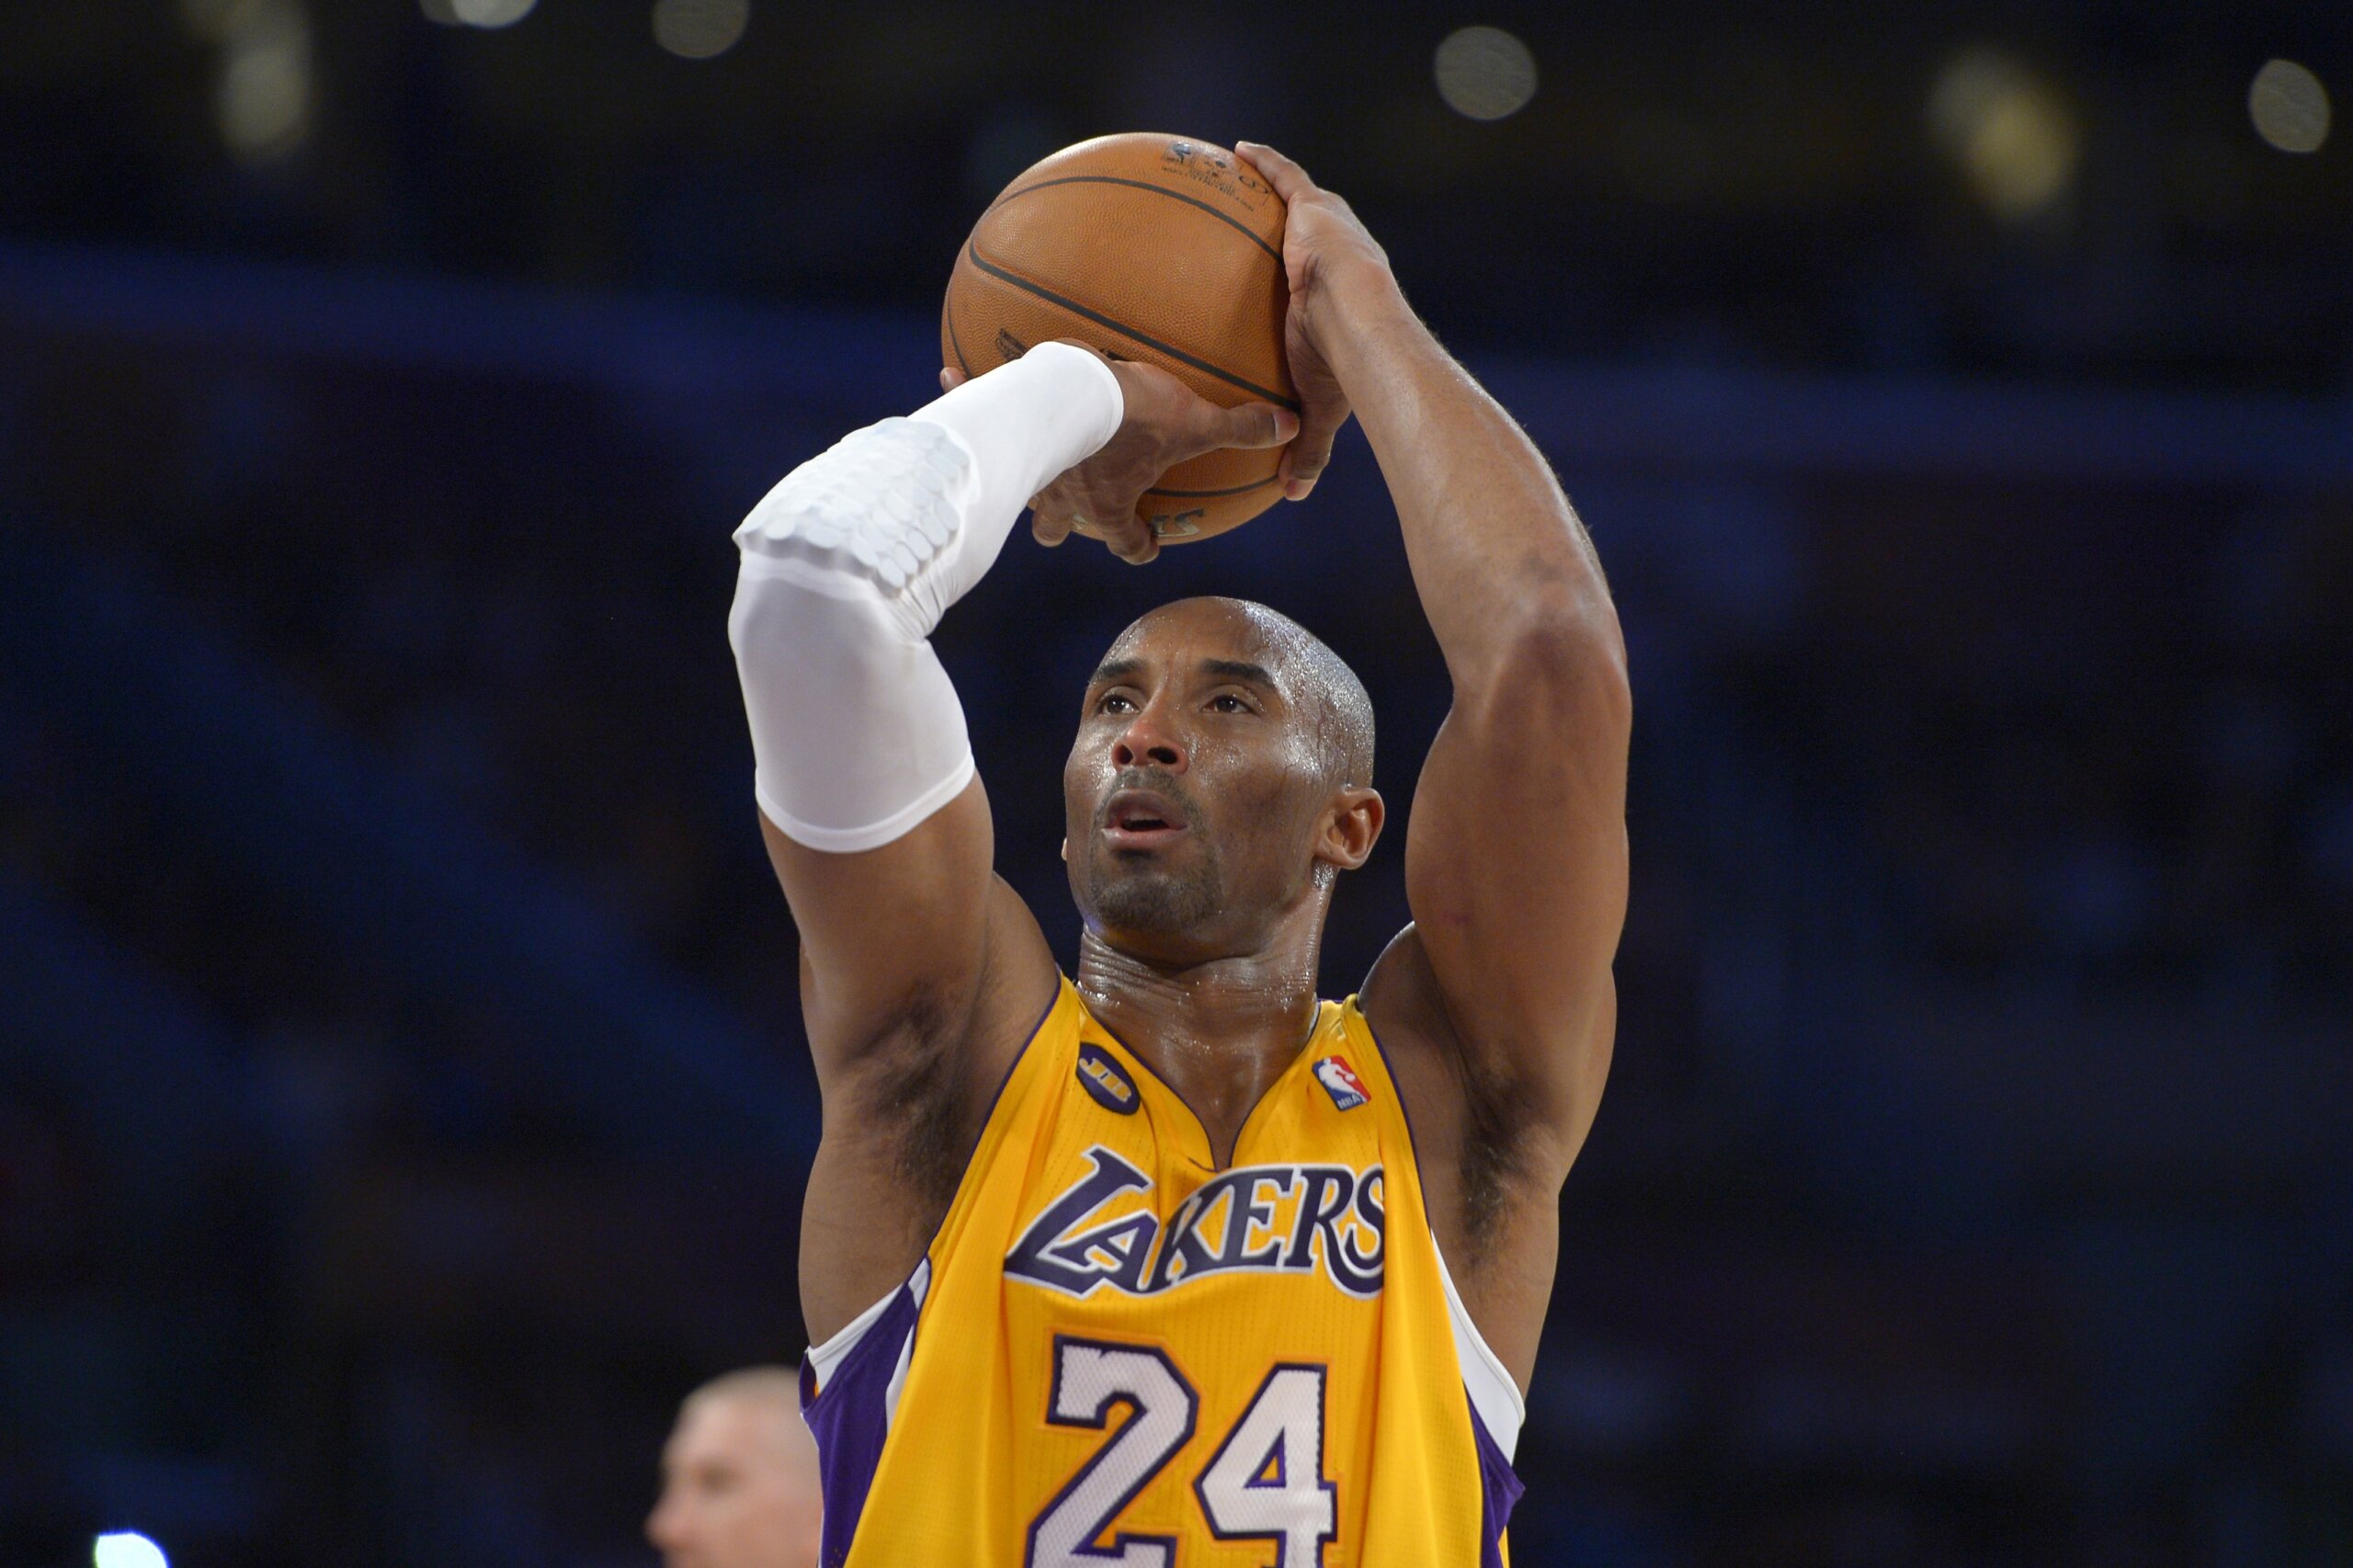 These are the NBA players who changed numbers to honor Kobe Bryant